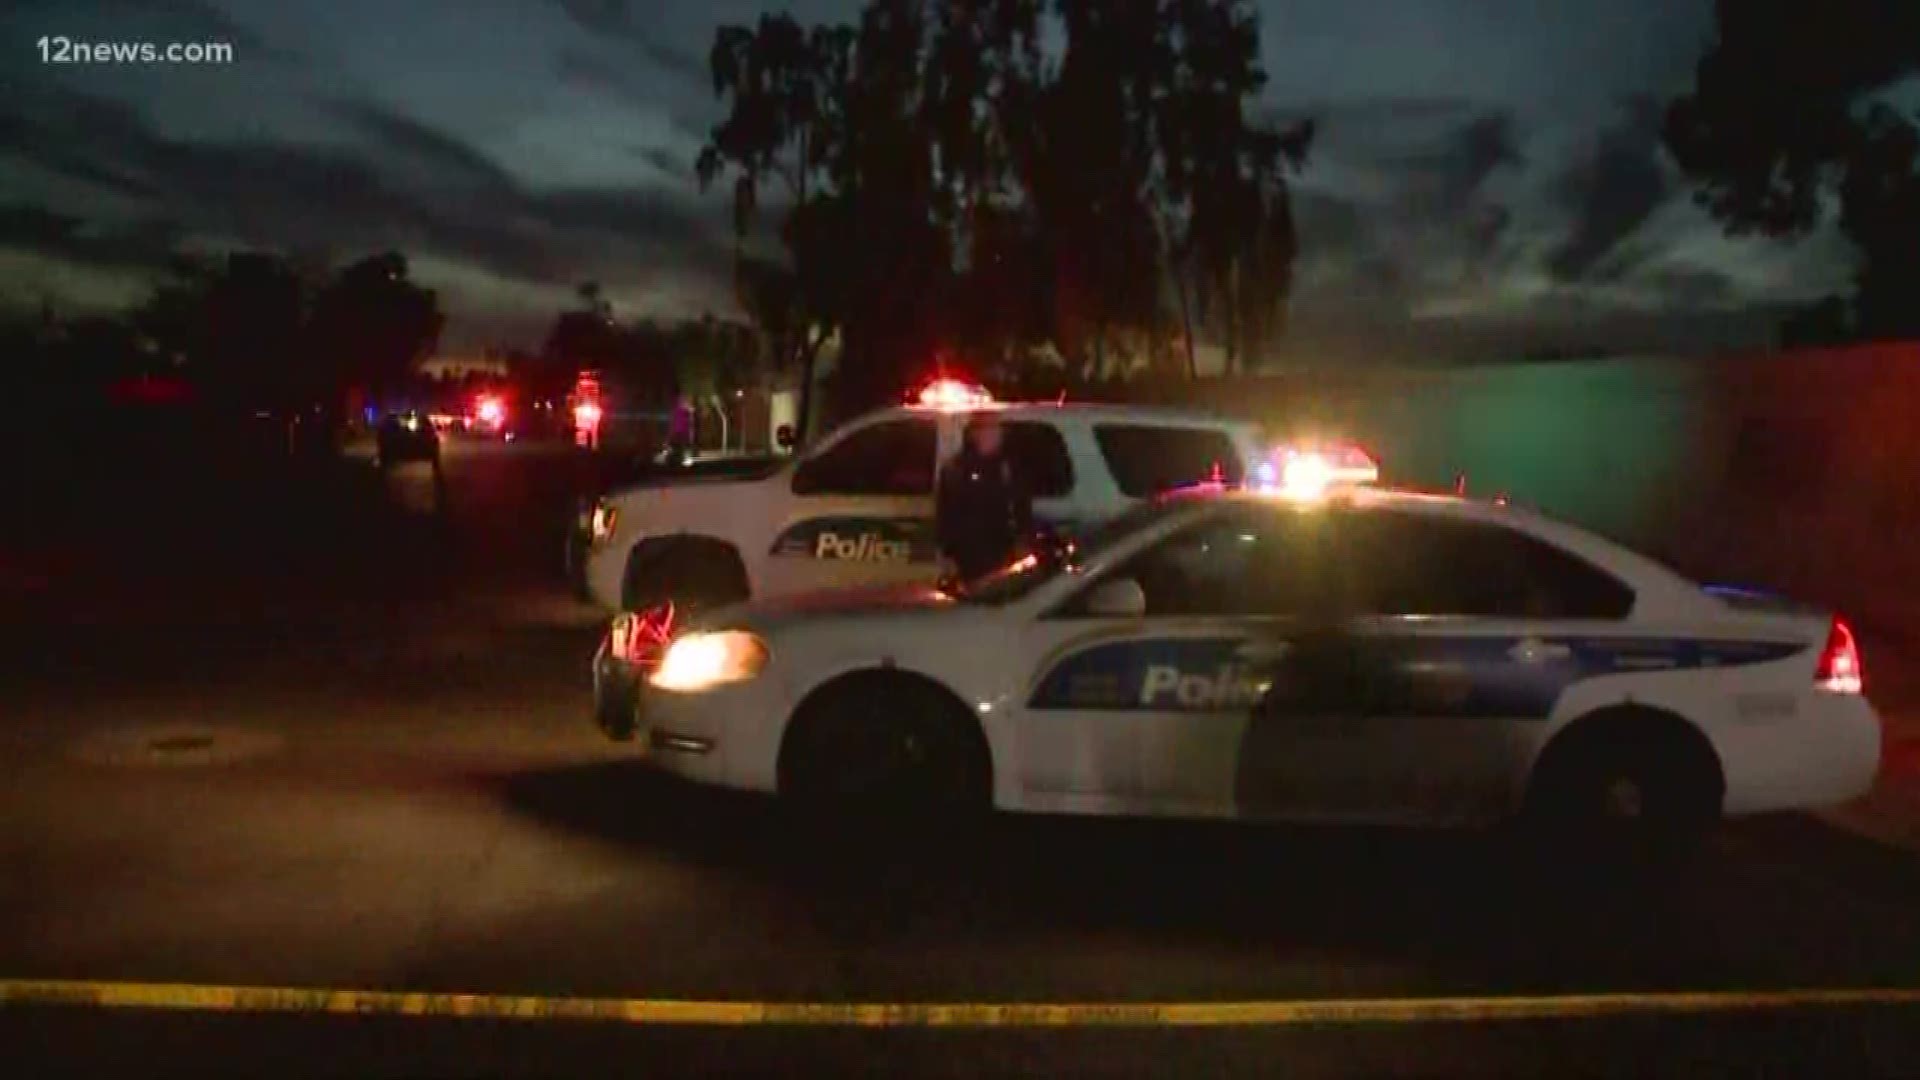 A 10-year-old girl and her father are in extremely critical condition after they were shot in front of their home near 39th Avenue and Roosevelt Street Wednesday evening, according to Phoenix police.